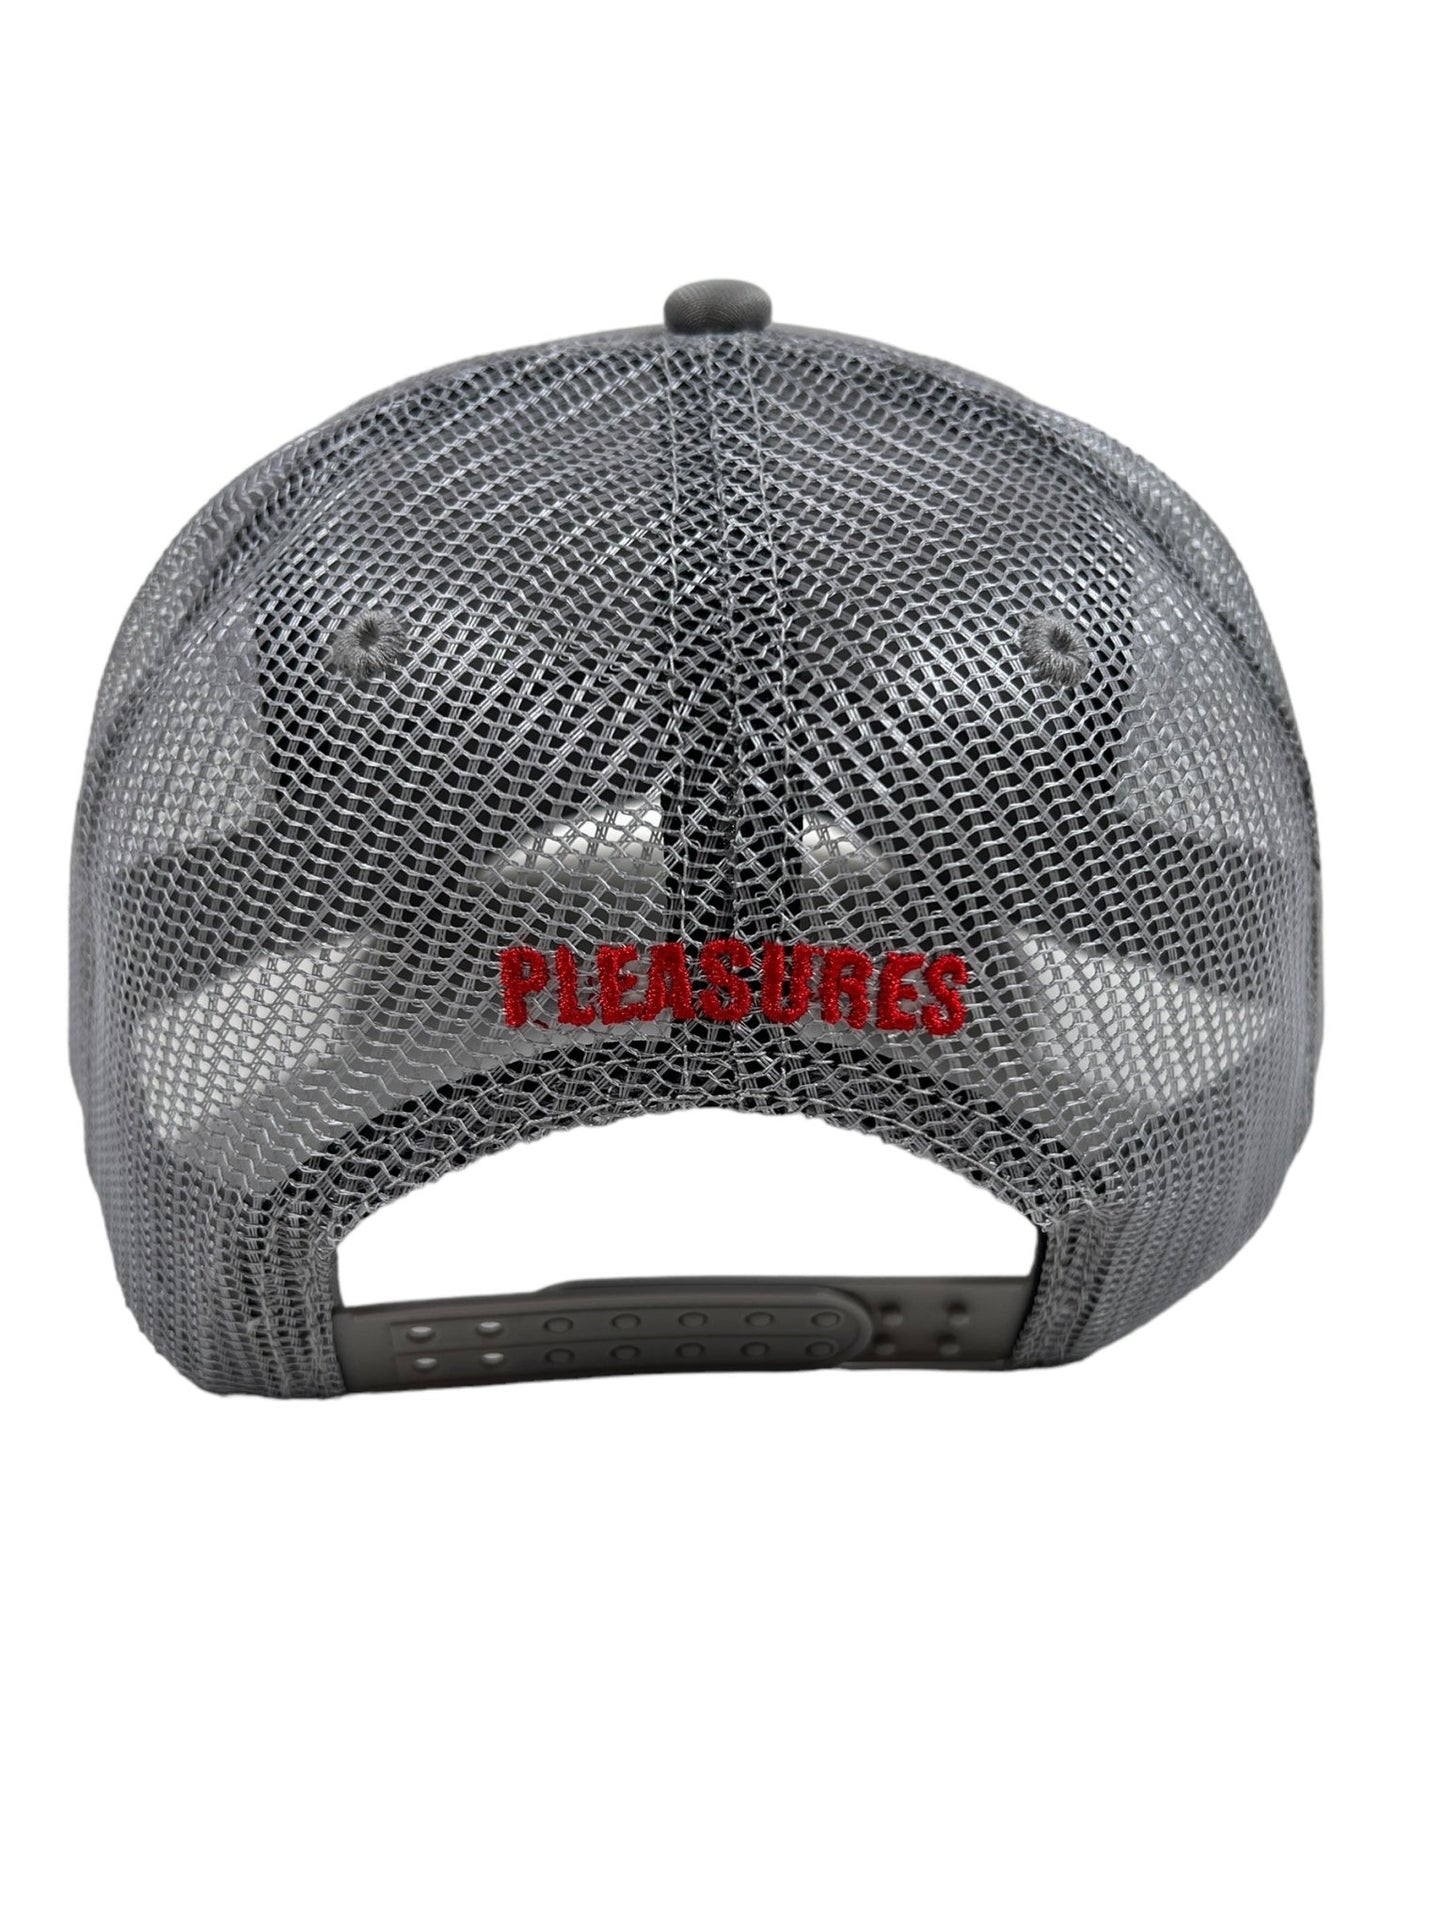 Back view of the PLEASURES TOXIC TRUCKER CAP GREY in grey mesh with "PLEASURES" embroidered in red on the back panel—a stylish accessory perfect for casual outings.